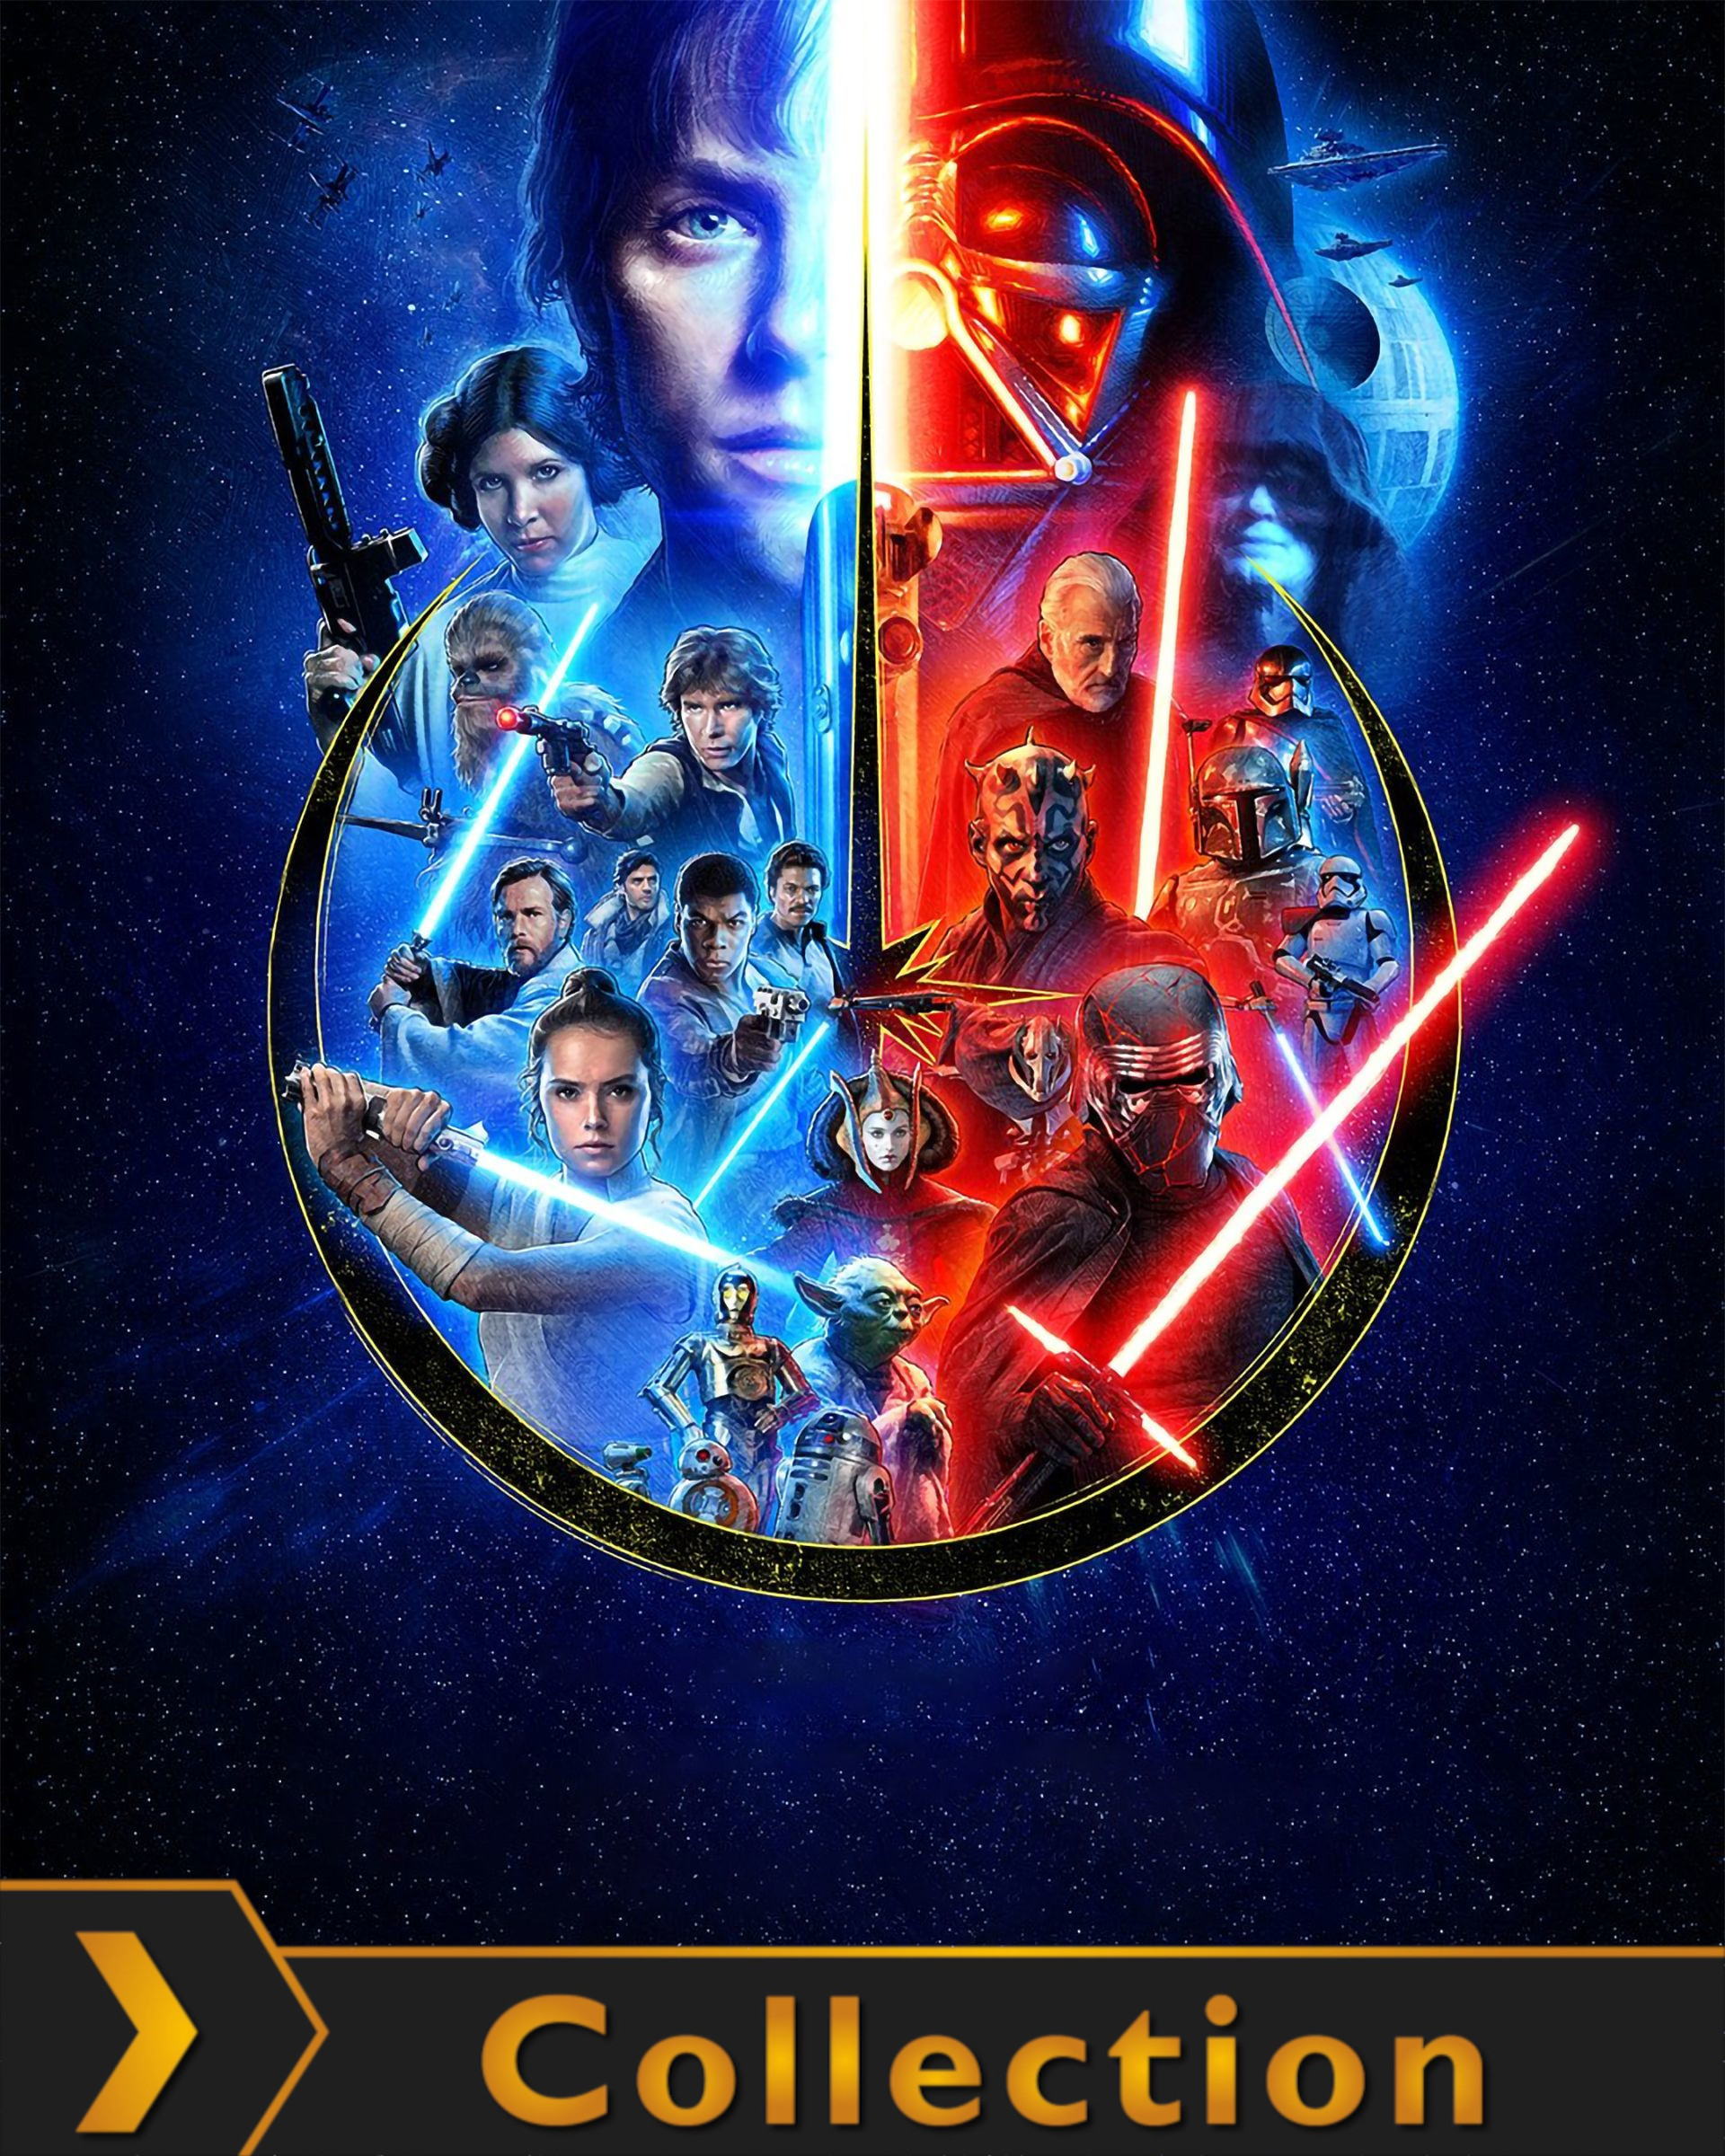 Star Wars Collection Poster Plex Star Wars Awakens Force Posters Collection Plex The Art Of Images 